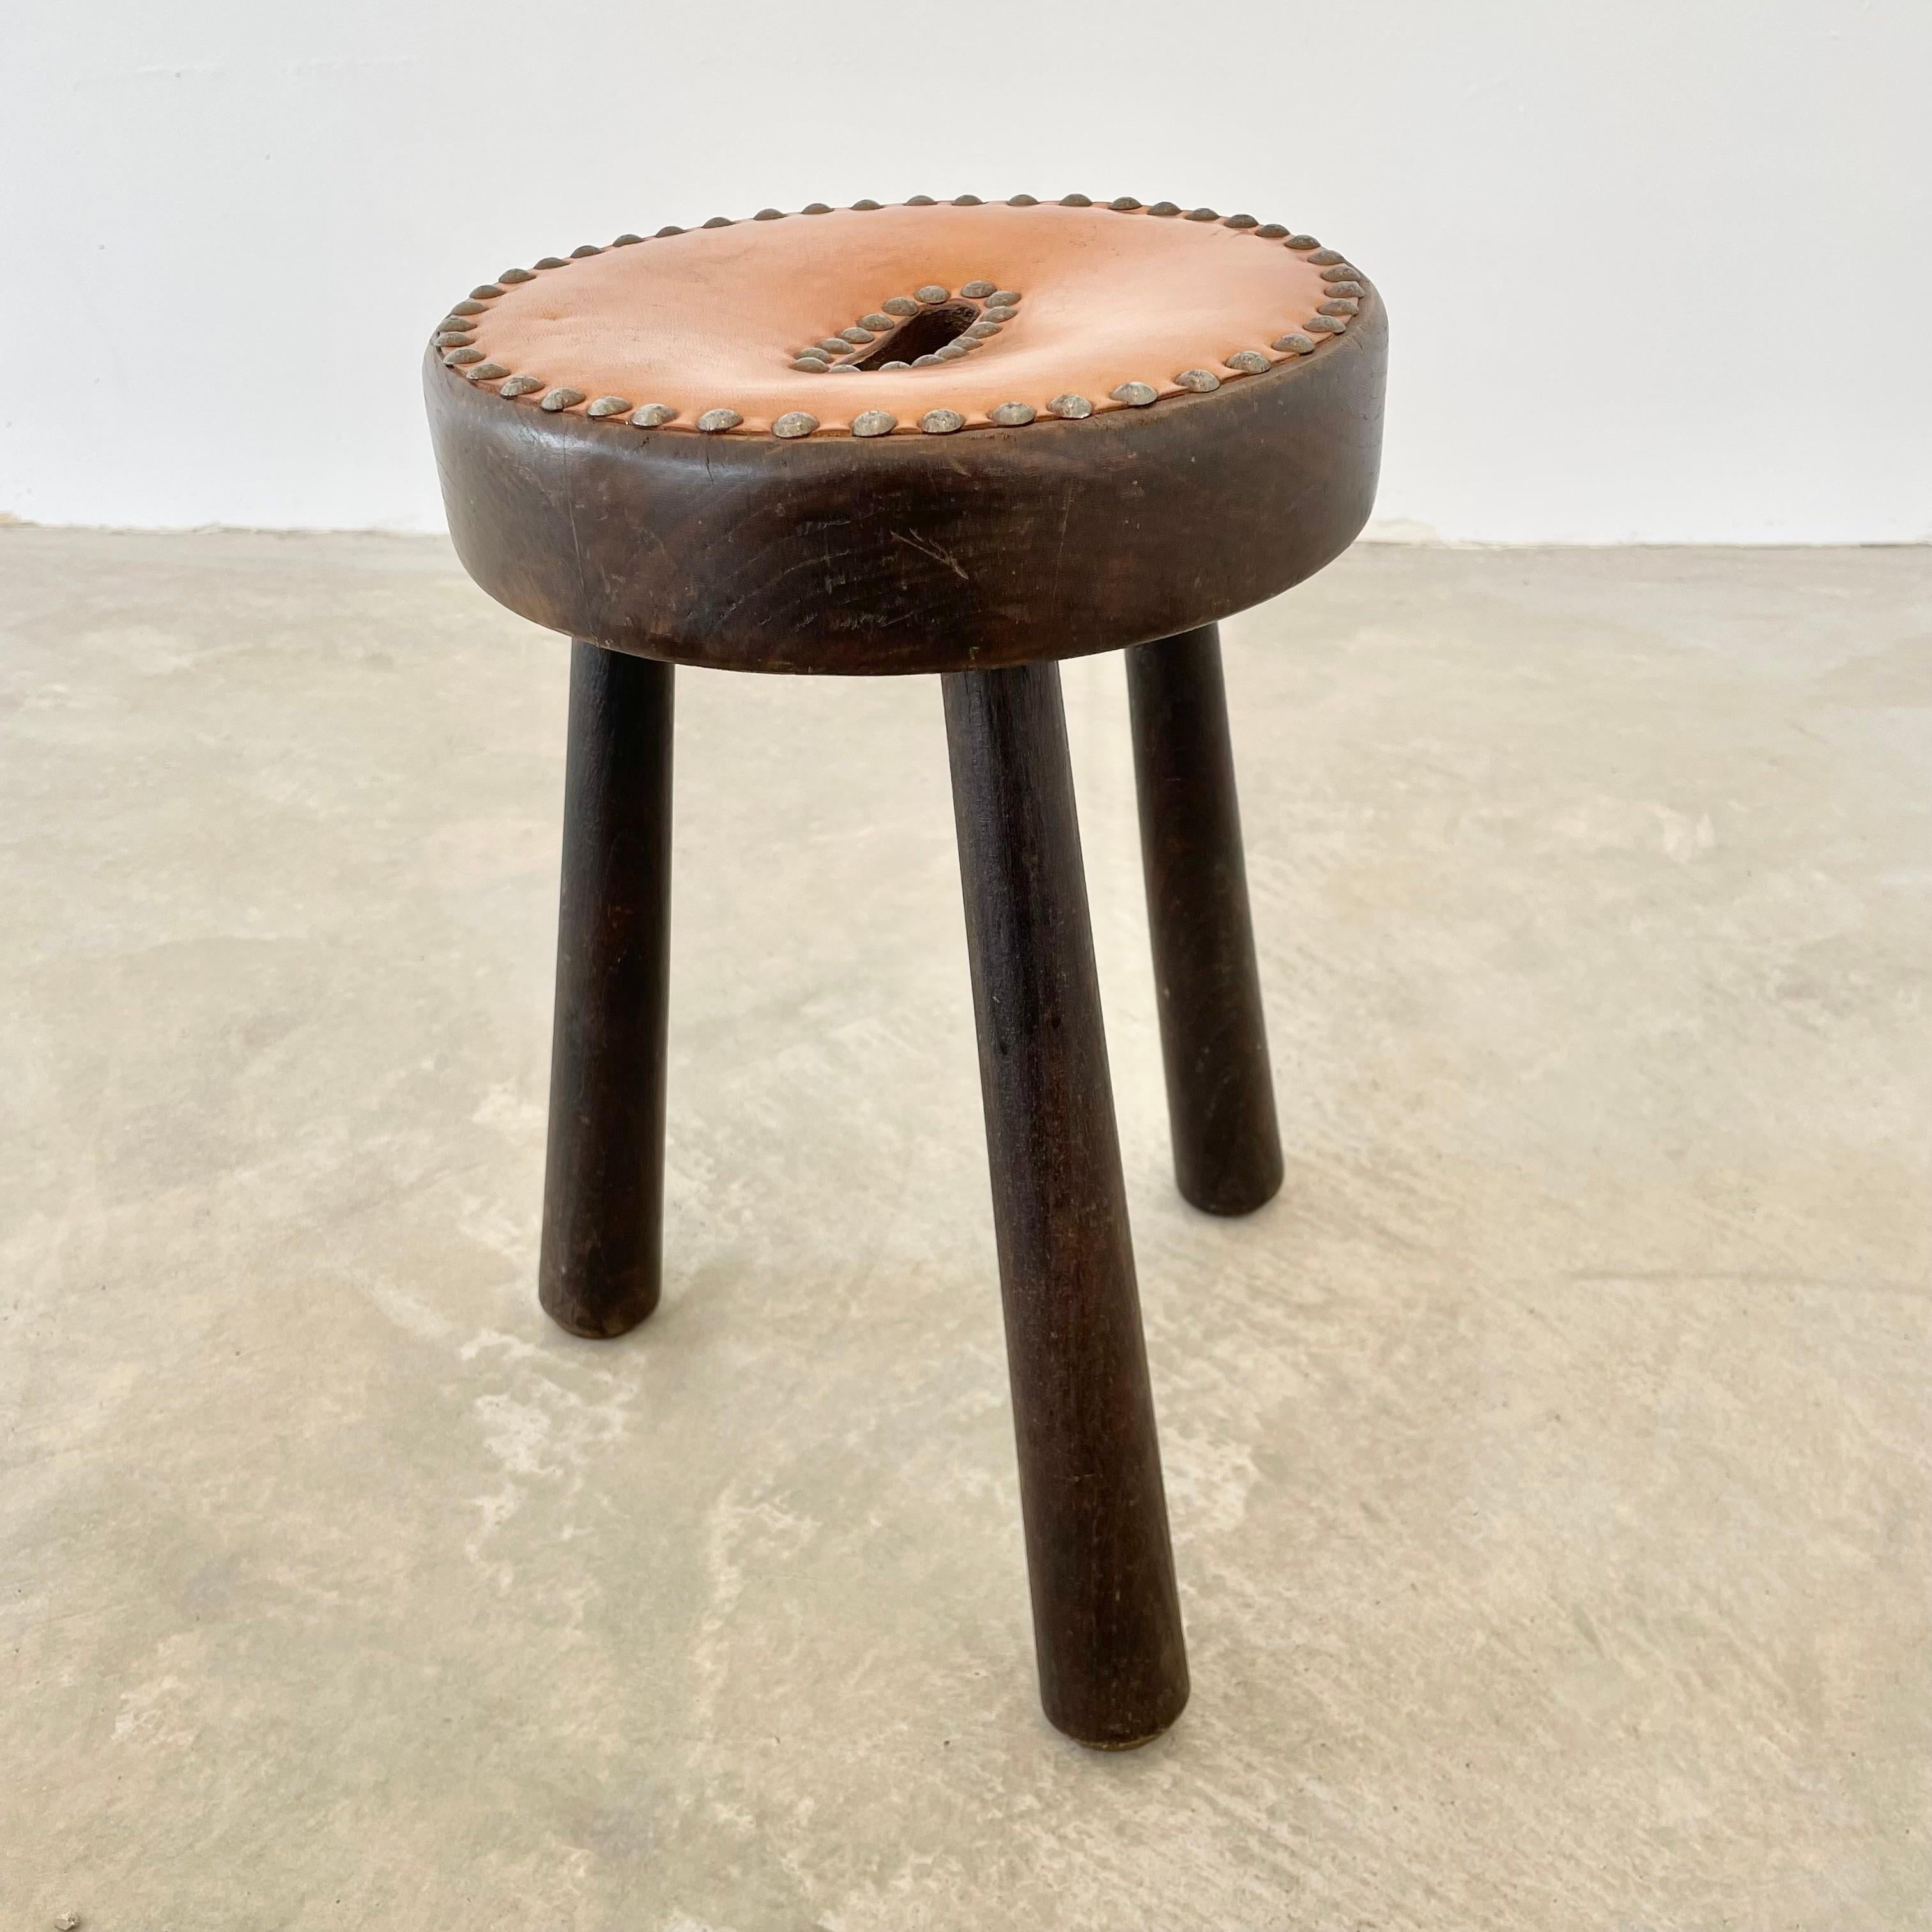 Leather and Wood Studded Stool, 1970s France For Sale 2